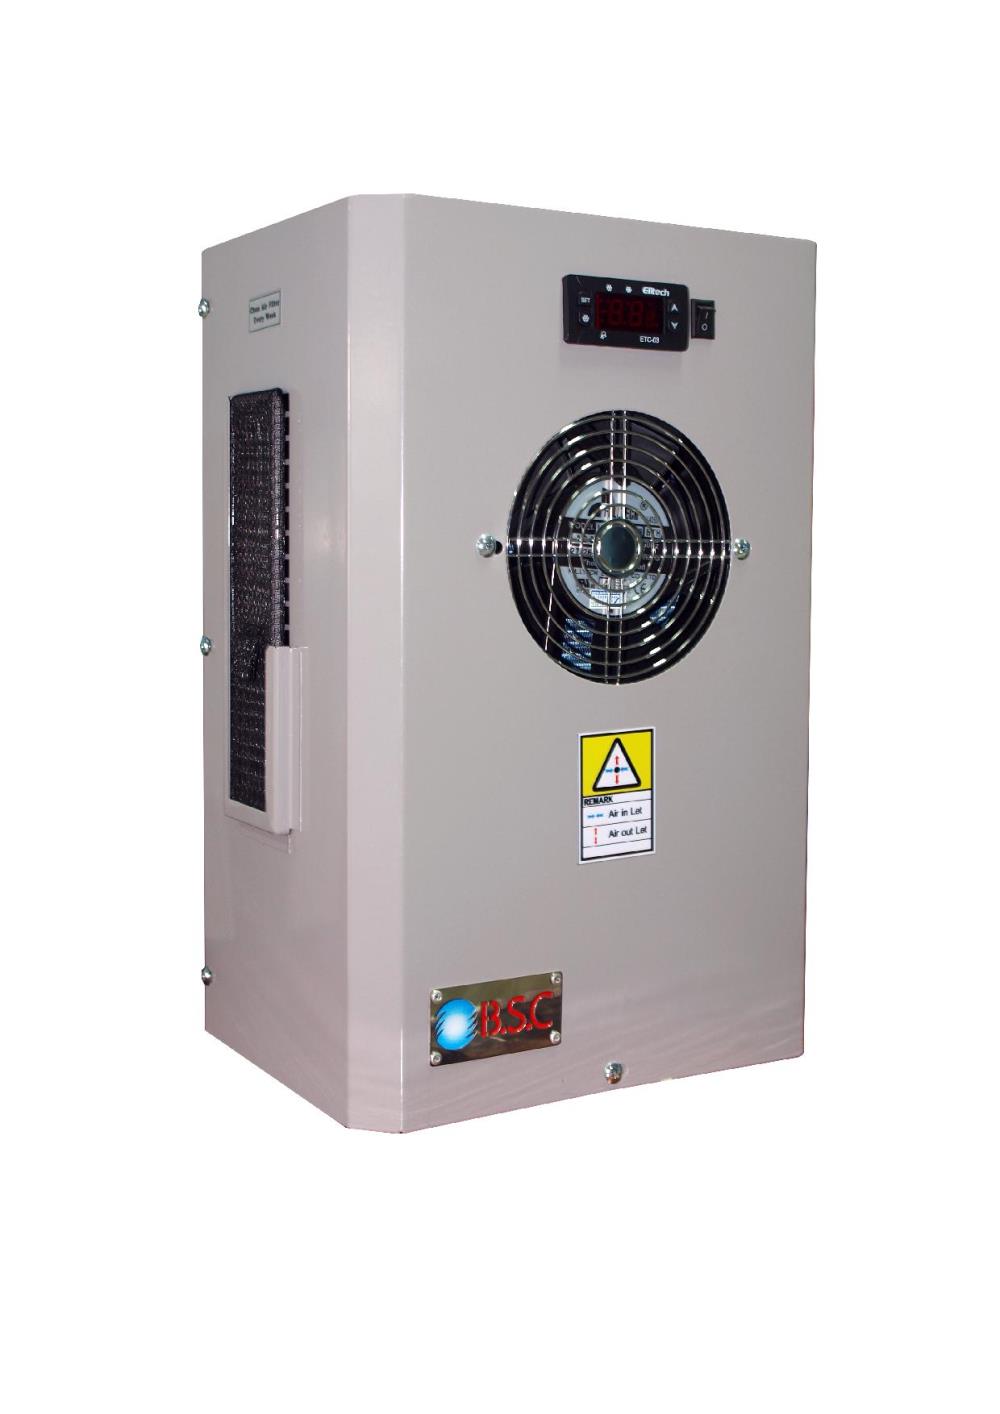 Air Condition : BSC550-C,แอร์ตู้คอนโทรล,BSC,Plant and Facility Equipment/HVAC/Air Conditioning